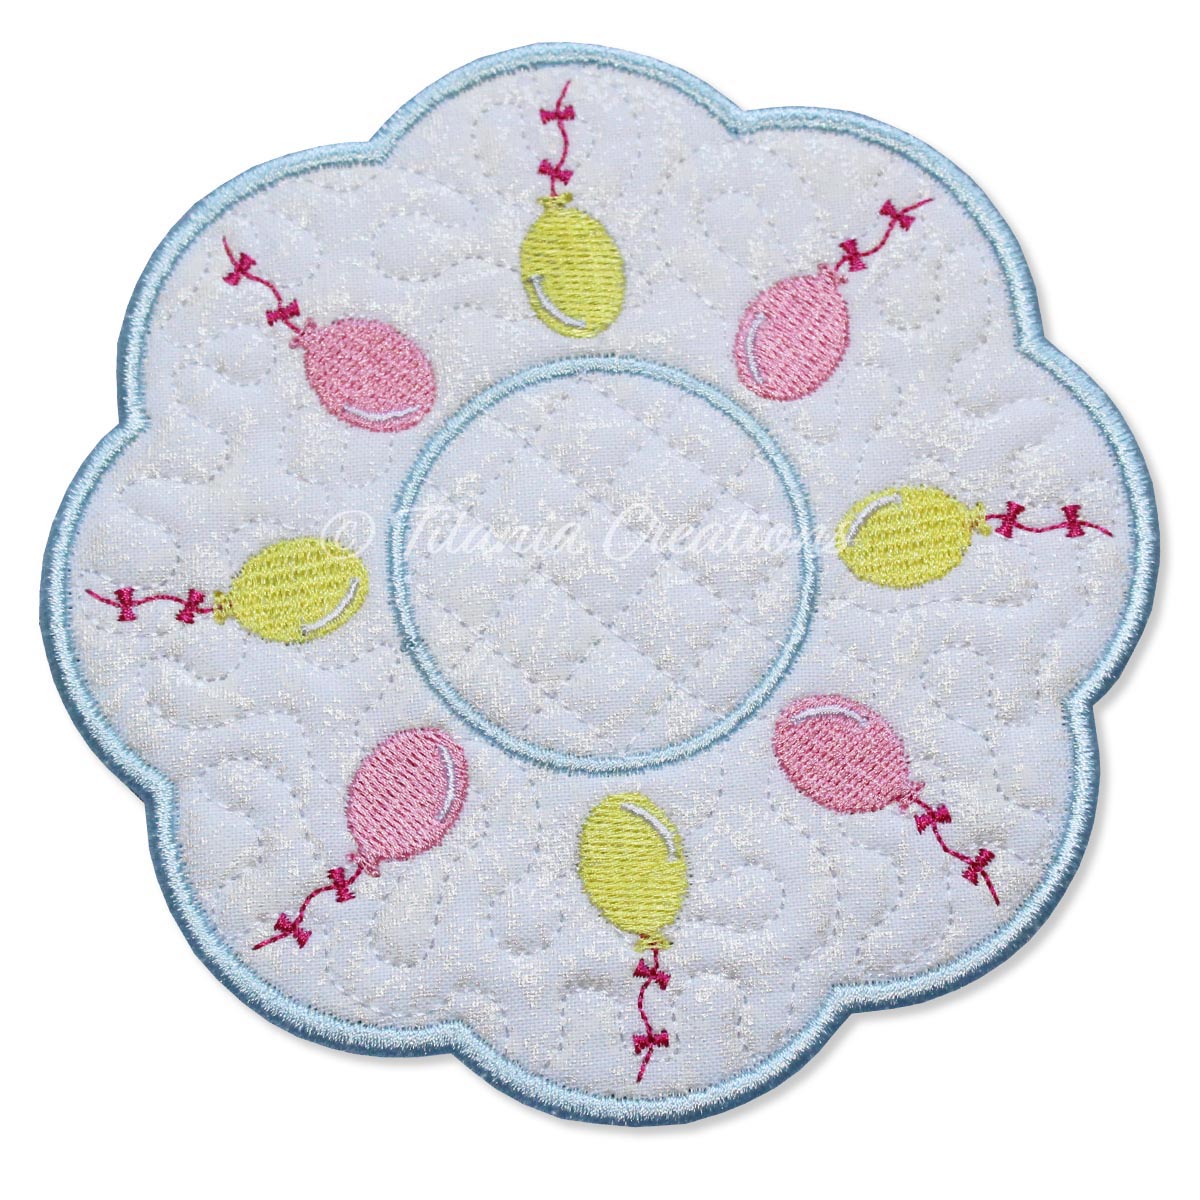 ITH Balloons Candle Mat 5x5 6x6 7x7 8x8